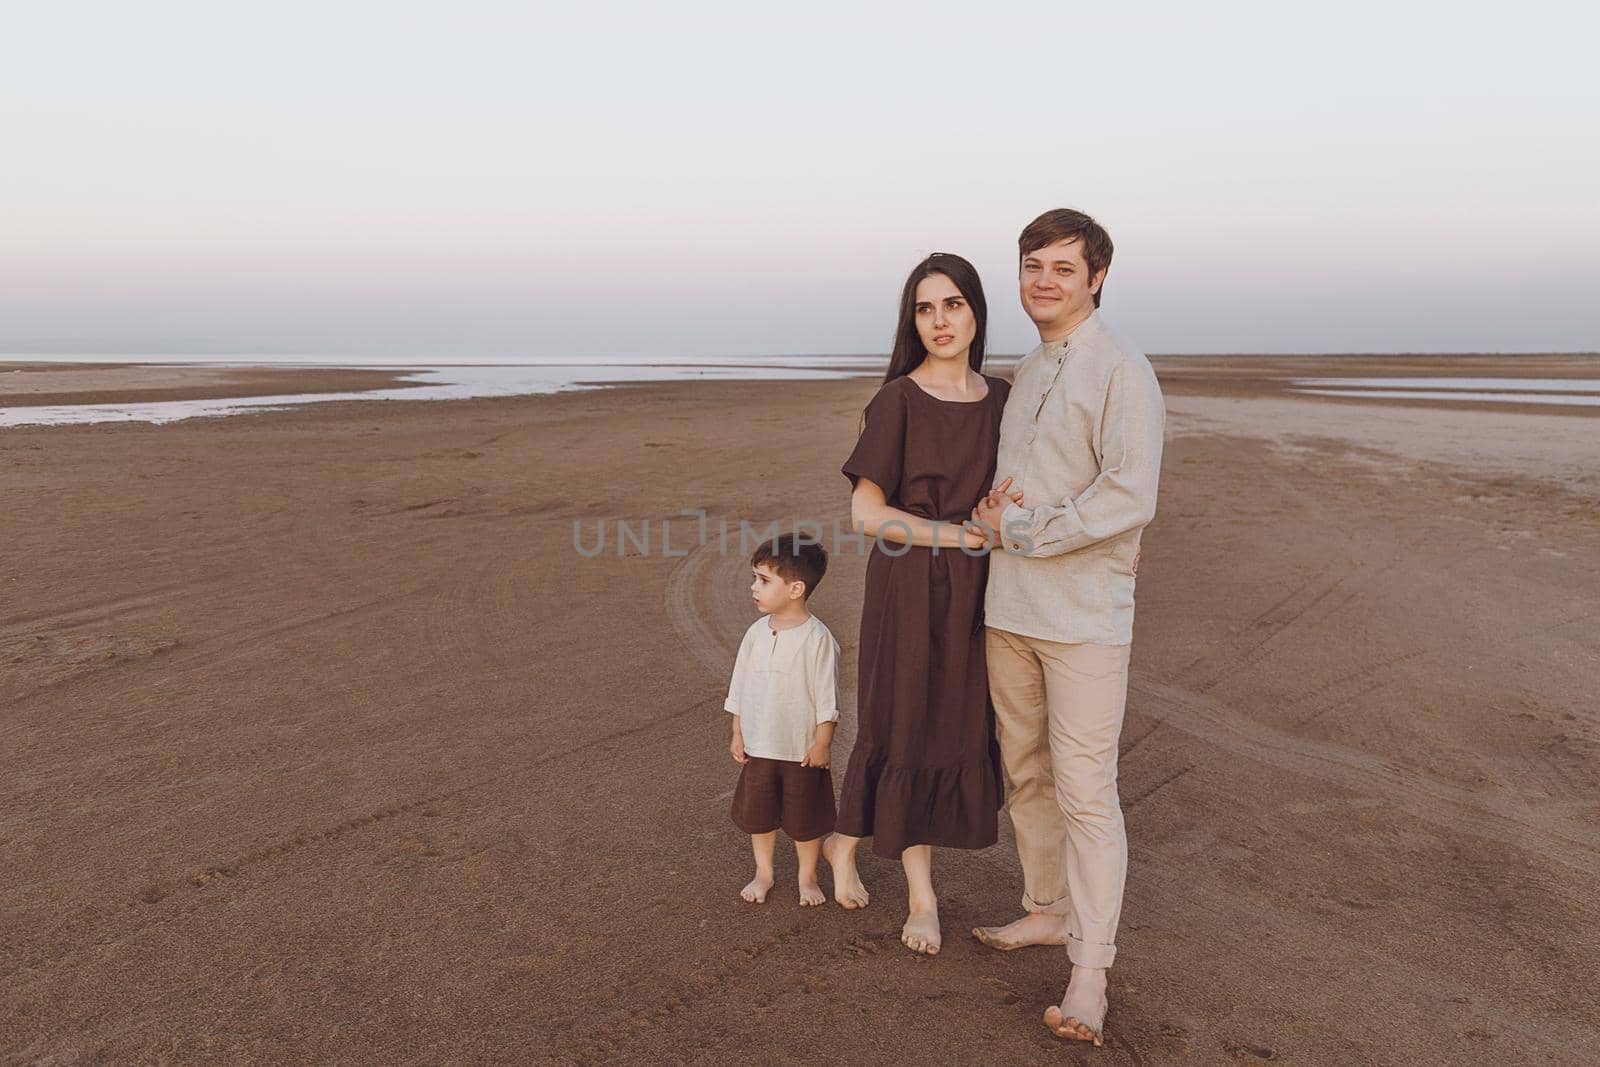 Family look of natural linen clothing on the evening beach. Copy space by Rom4ek